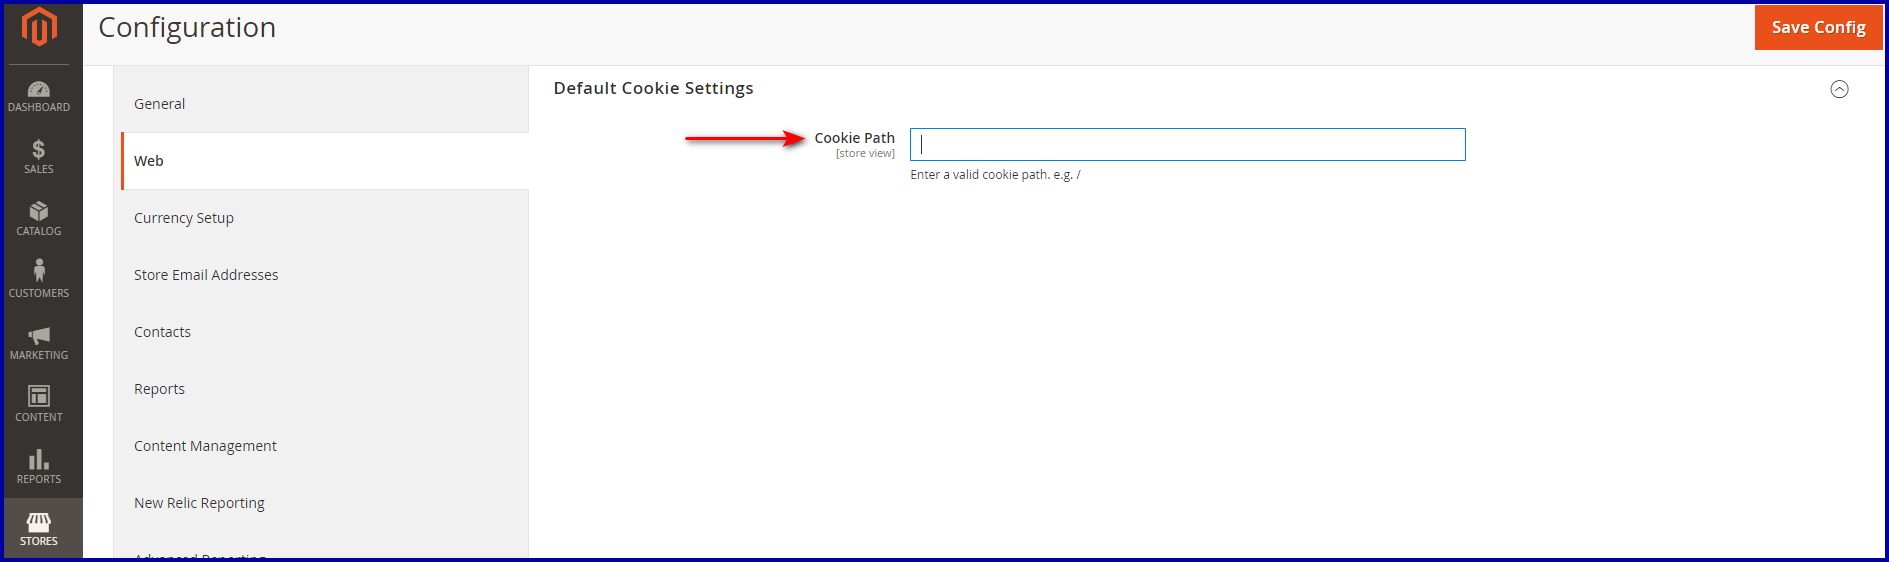 How to set Cookie Path in Magento 2